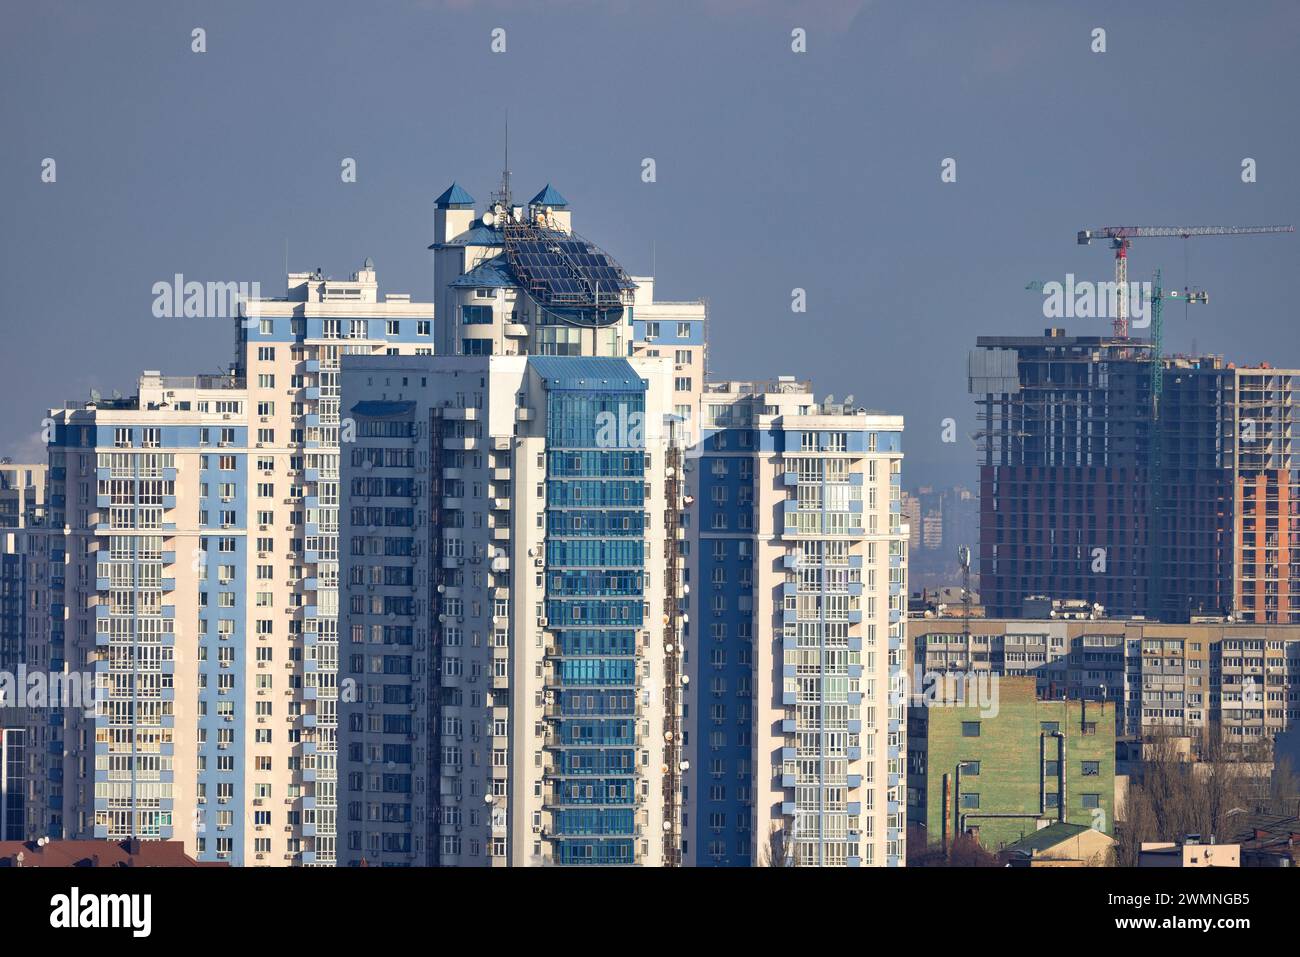 The concept of ecological energy sources for a multi-storey residential building. Stock Photo